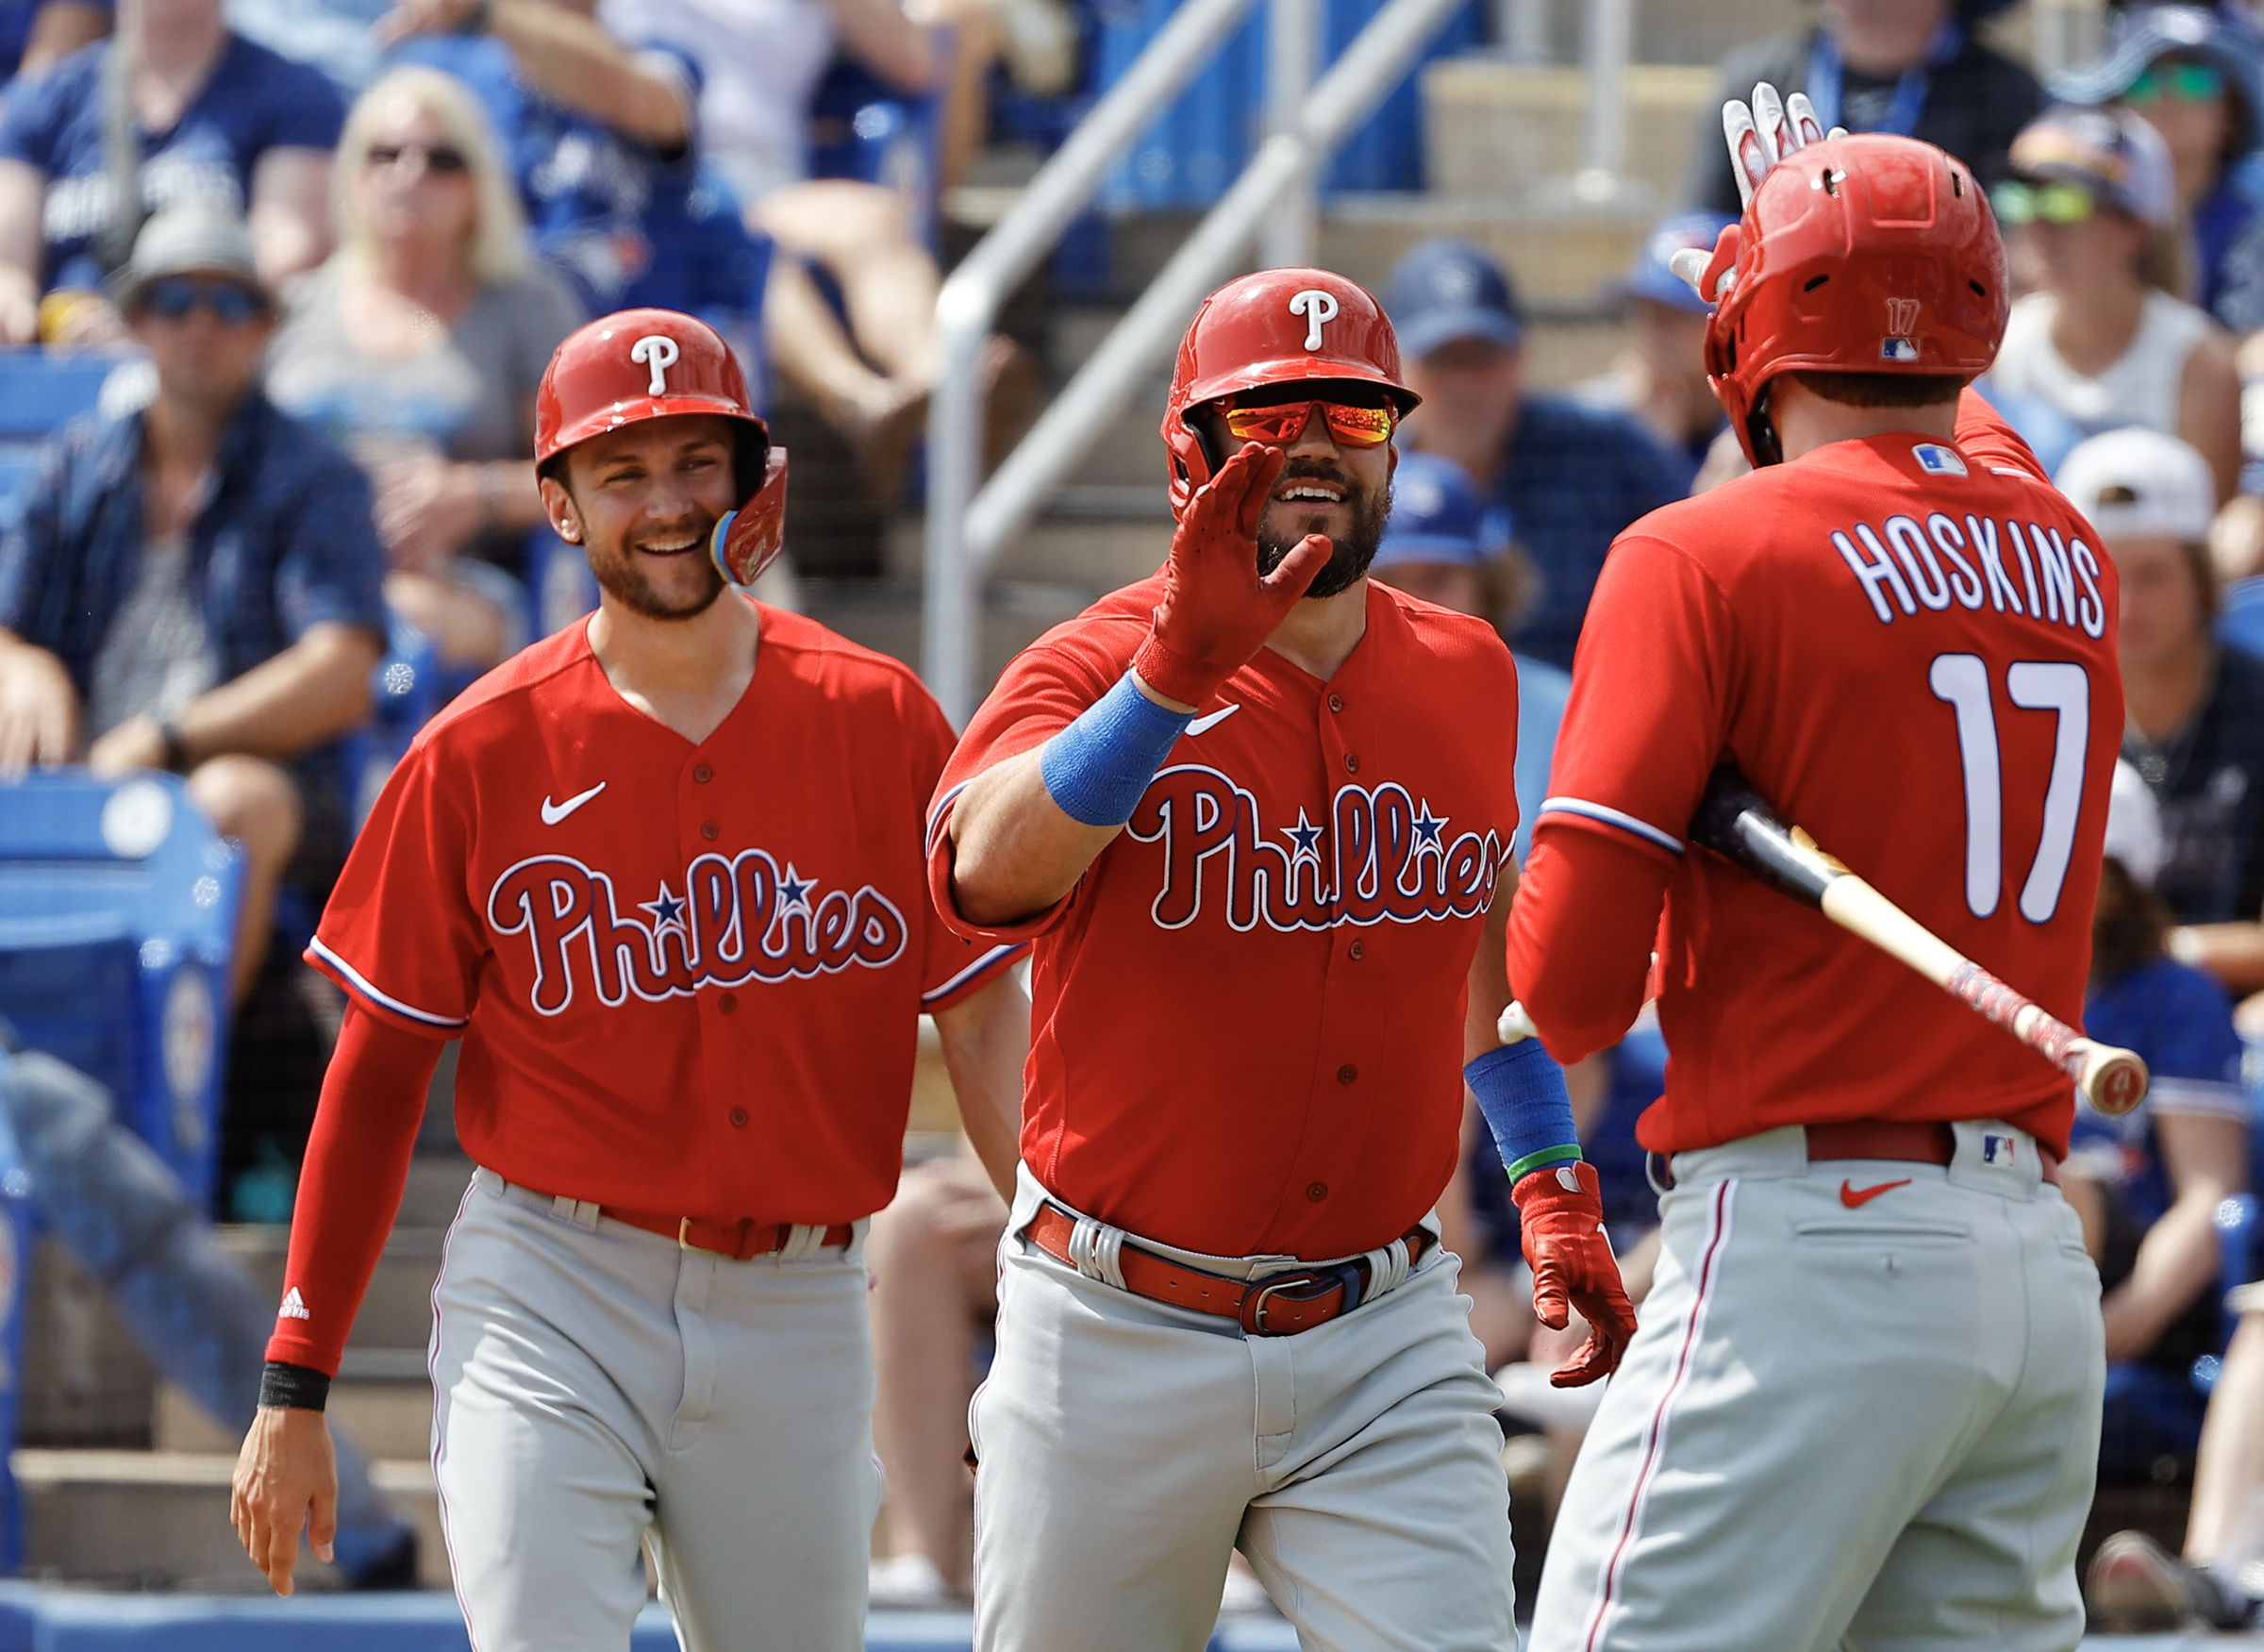 Blue Jays 16, Phillies 4: The 1-2 punch of Trea Turner and Kyle